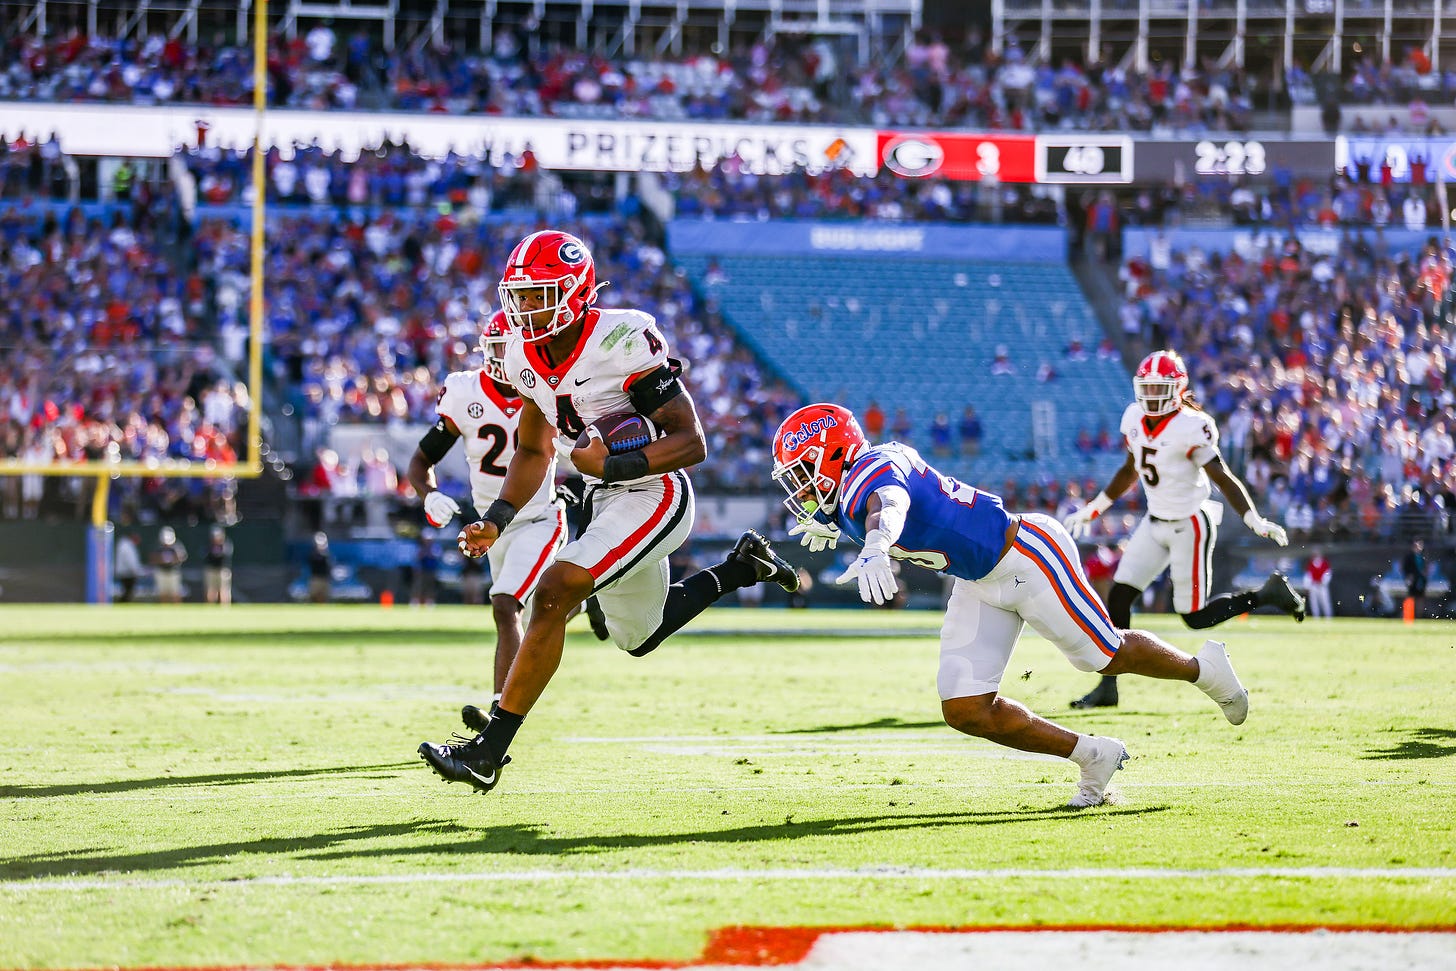 Georgia outside linebacker Nolan Smith (4) during a game against Florida at TIAA Bank Field in Jacksonville, Fl., on Saturday, Oct. 30, 2021. (Photo by Mackenzie Miles)